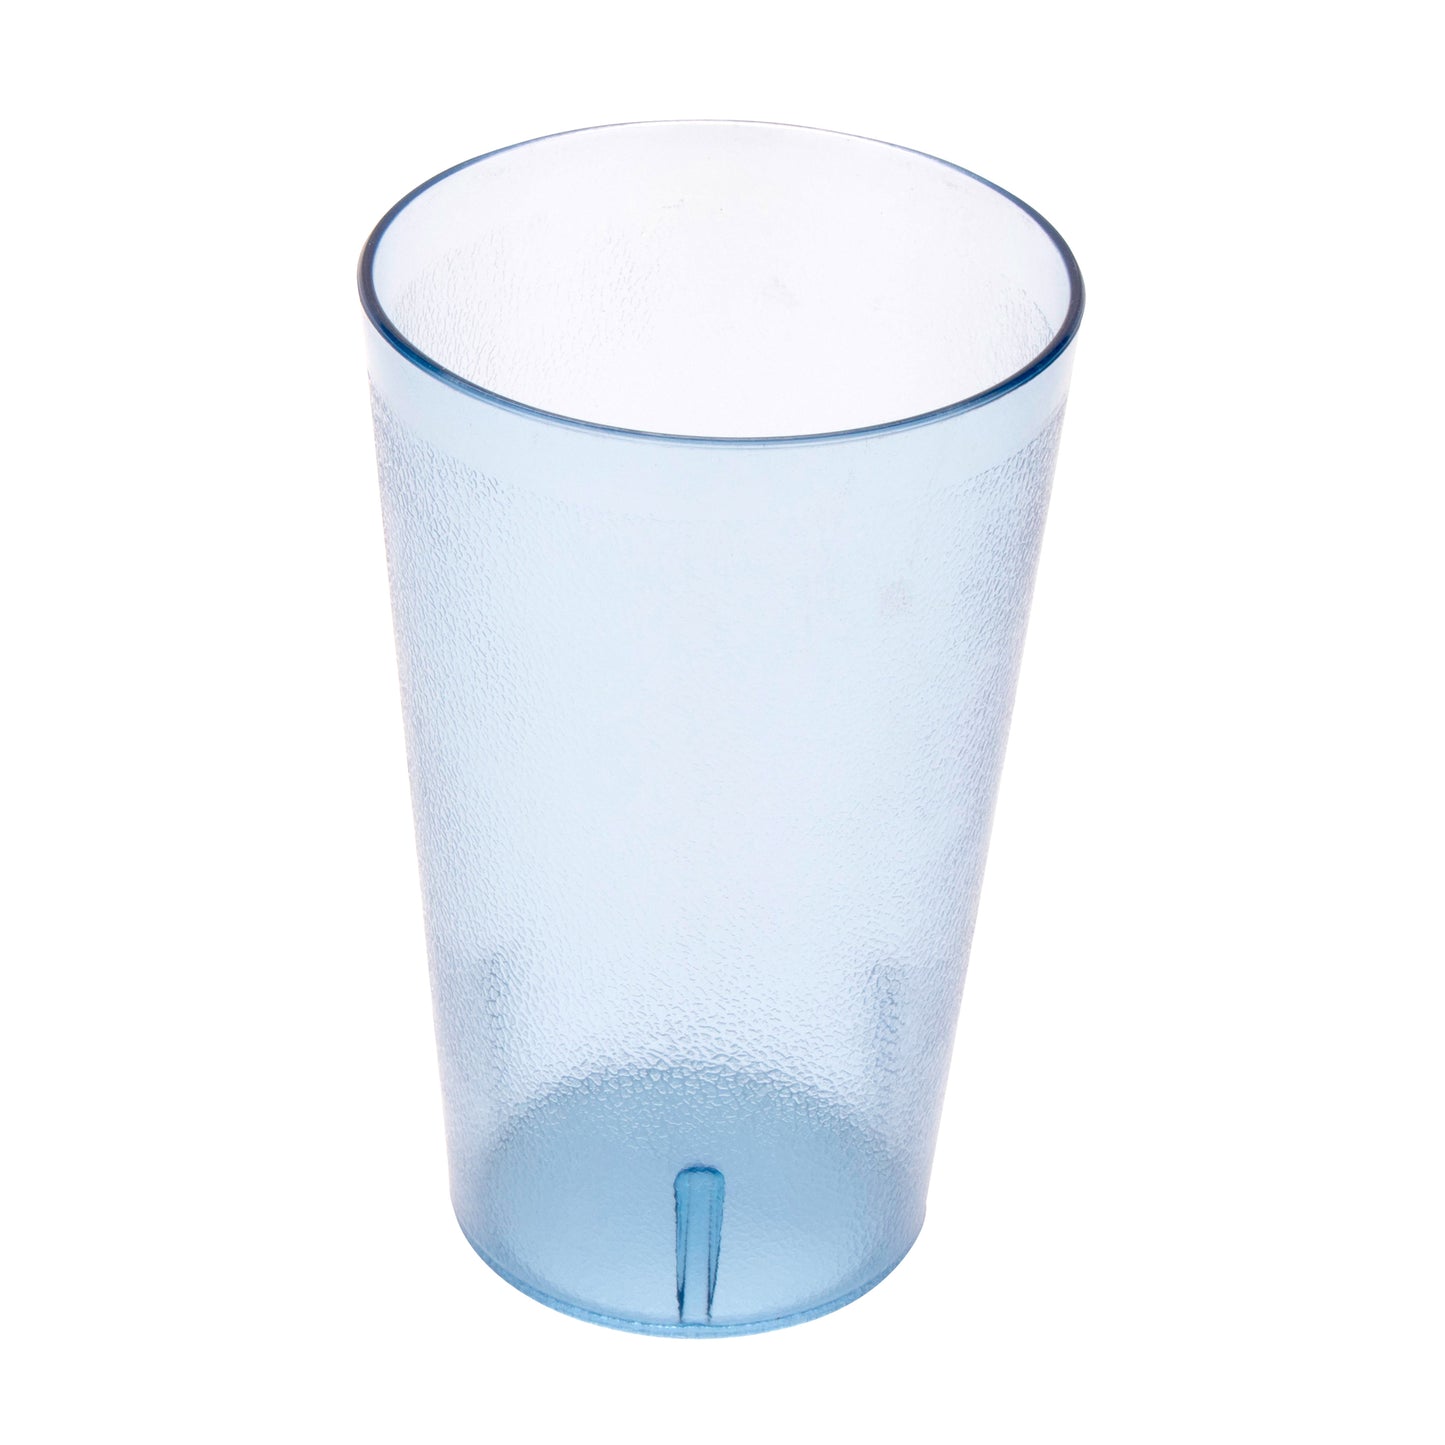 GET SAN Texted Tumbler 32 Ounce - Blue (12 Pack)